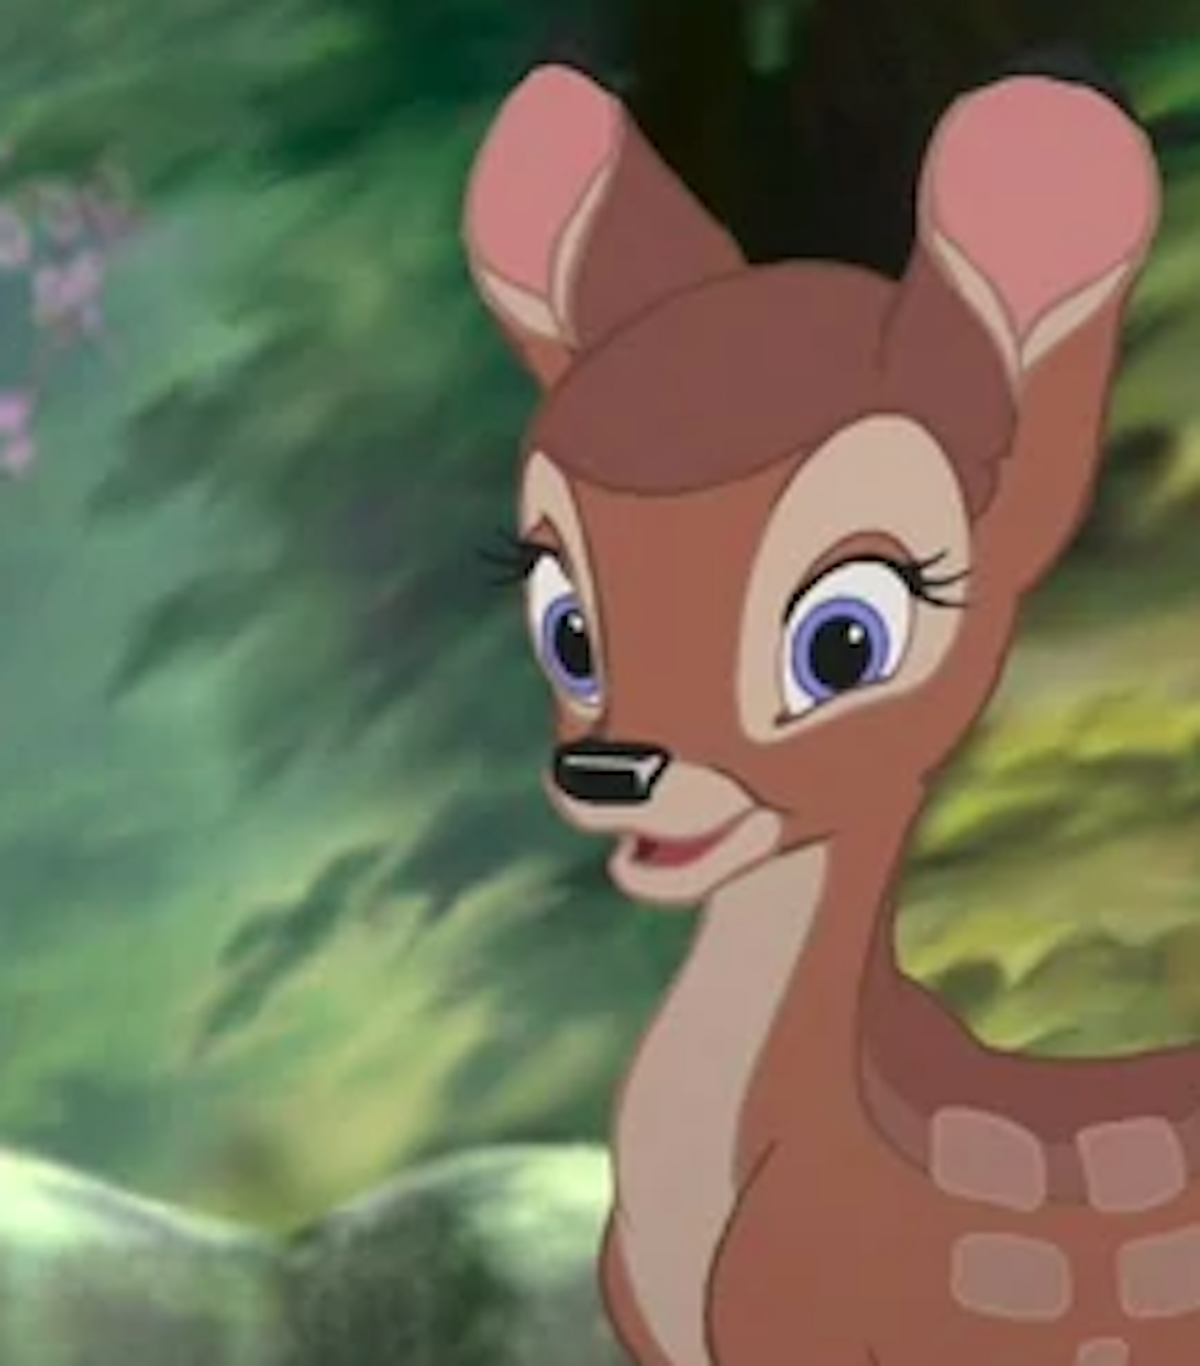 The Young Princess•deer•known Fawn Faline The 2d Cartoon Animated Wiki Fandom 4691